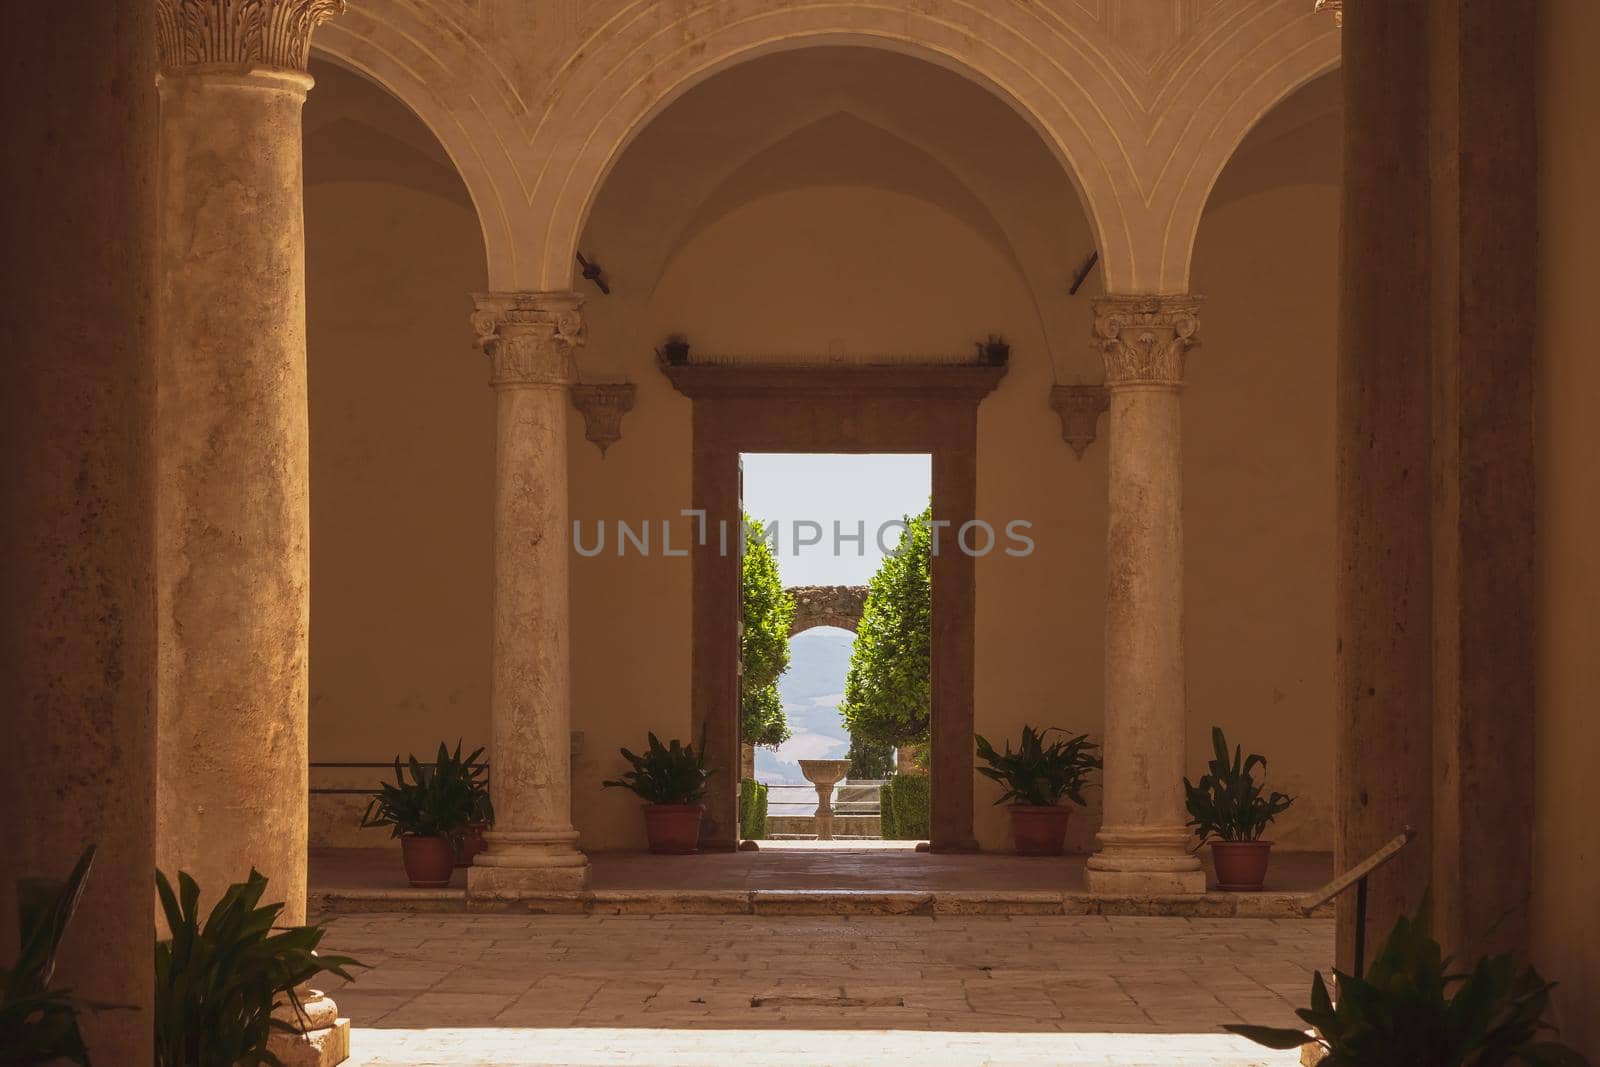 View of the beautiful Cloister of Piccolomini Palace in the famous town of Pienza, Tuscany, Italy. In the distance the view of the Tuscan countryside in the summer season.